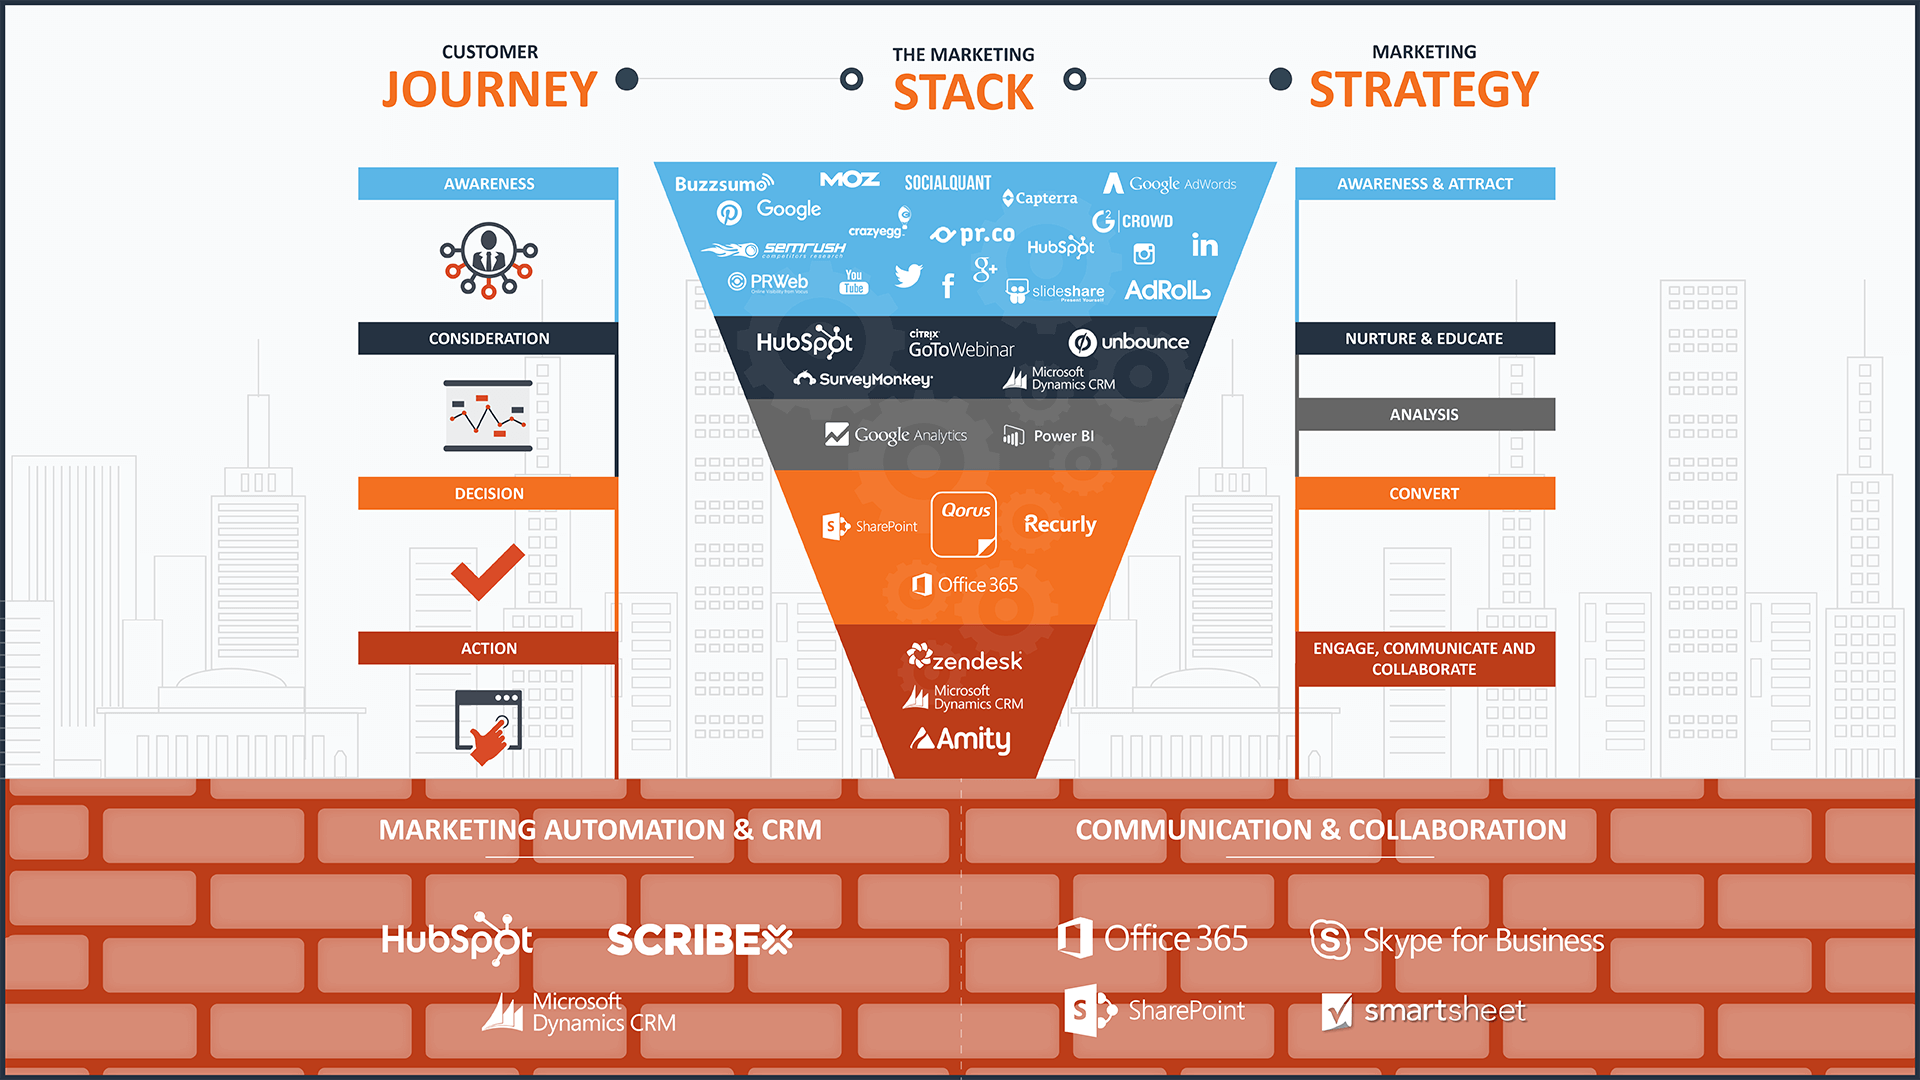 The Marketing Stack